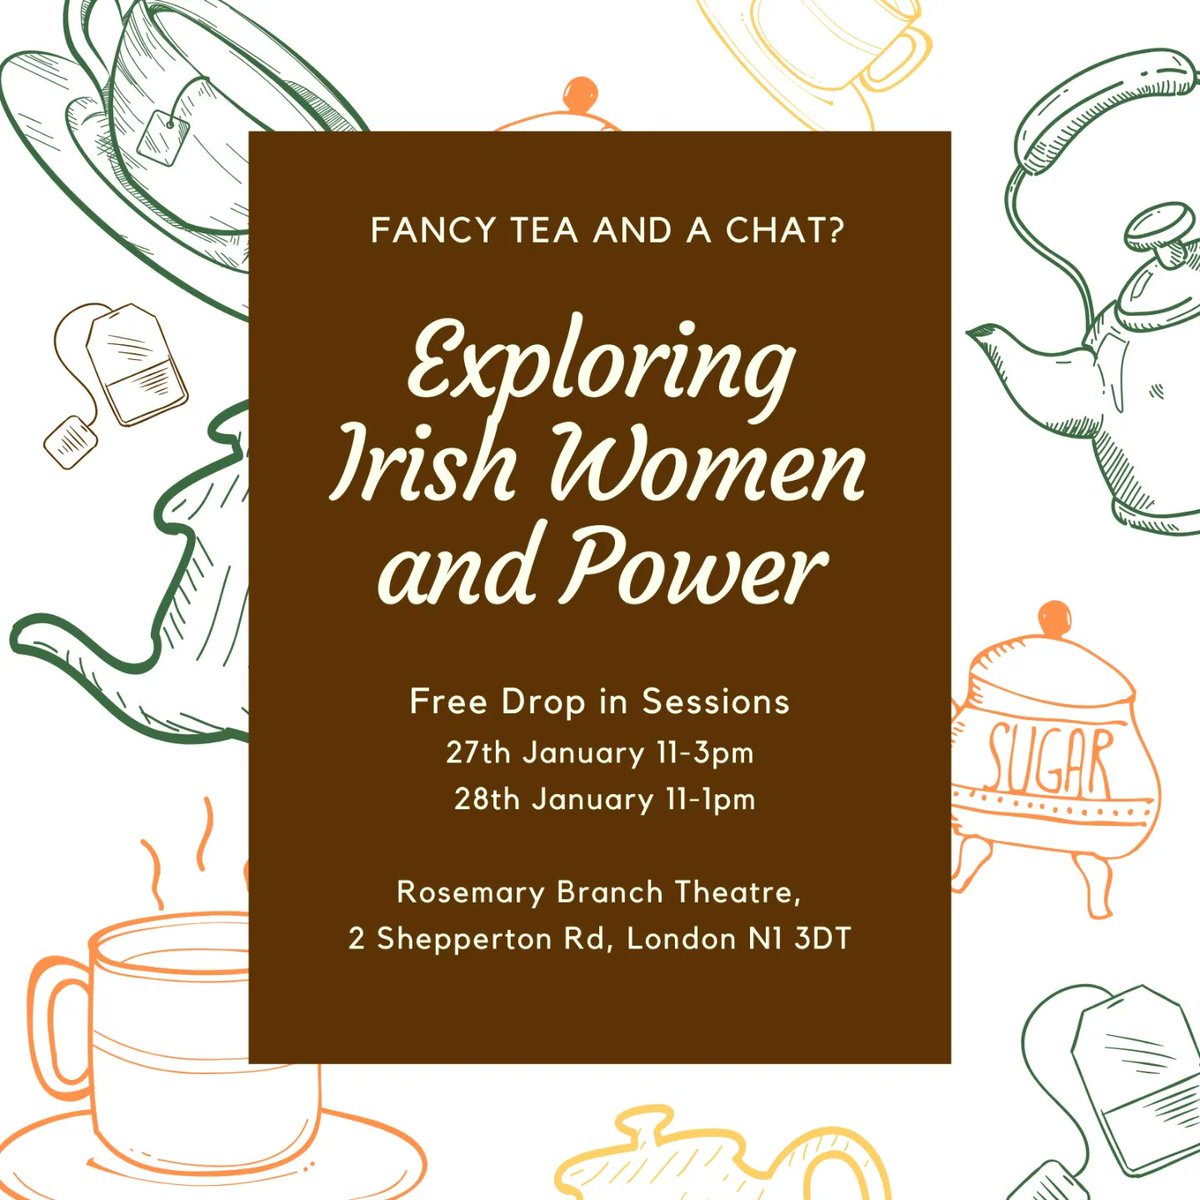 Calling all Irish women or women with Irish heritage to come join me & @couscoussista to share a cup of tea and your thoughts on Irish women and power! Please share with anyone you think might be interested! More info here: rosemarybranchtheatre.co.uk/show/exploring… #IrishWomen #GatherTogether